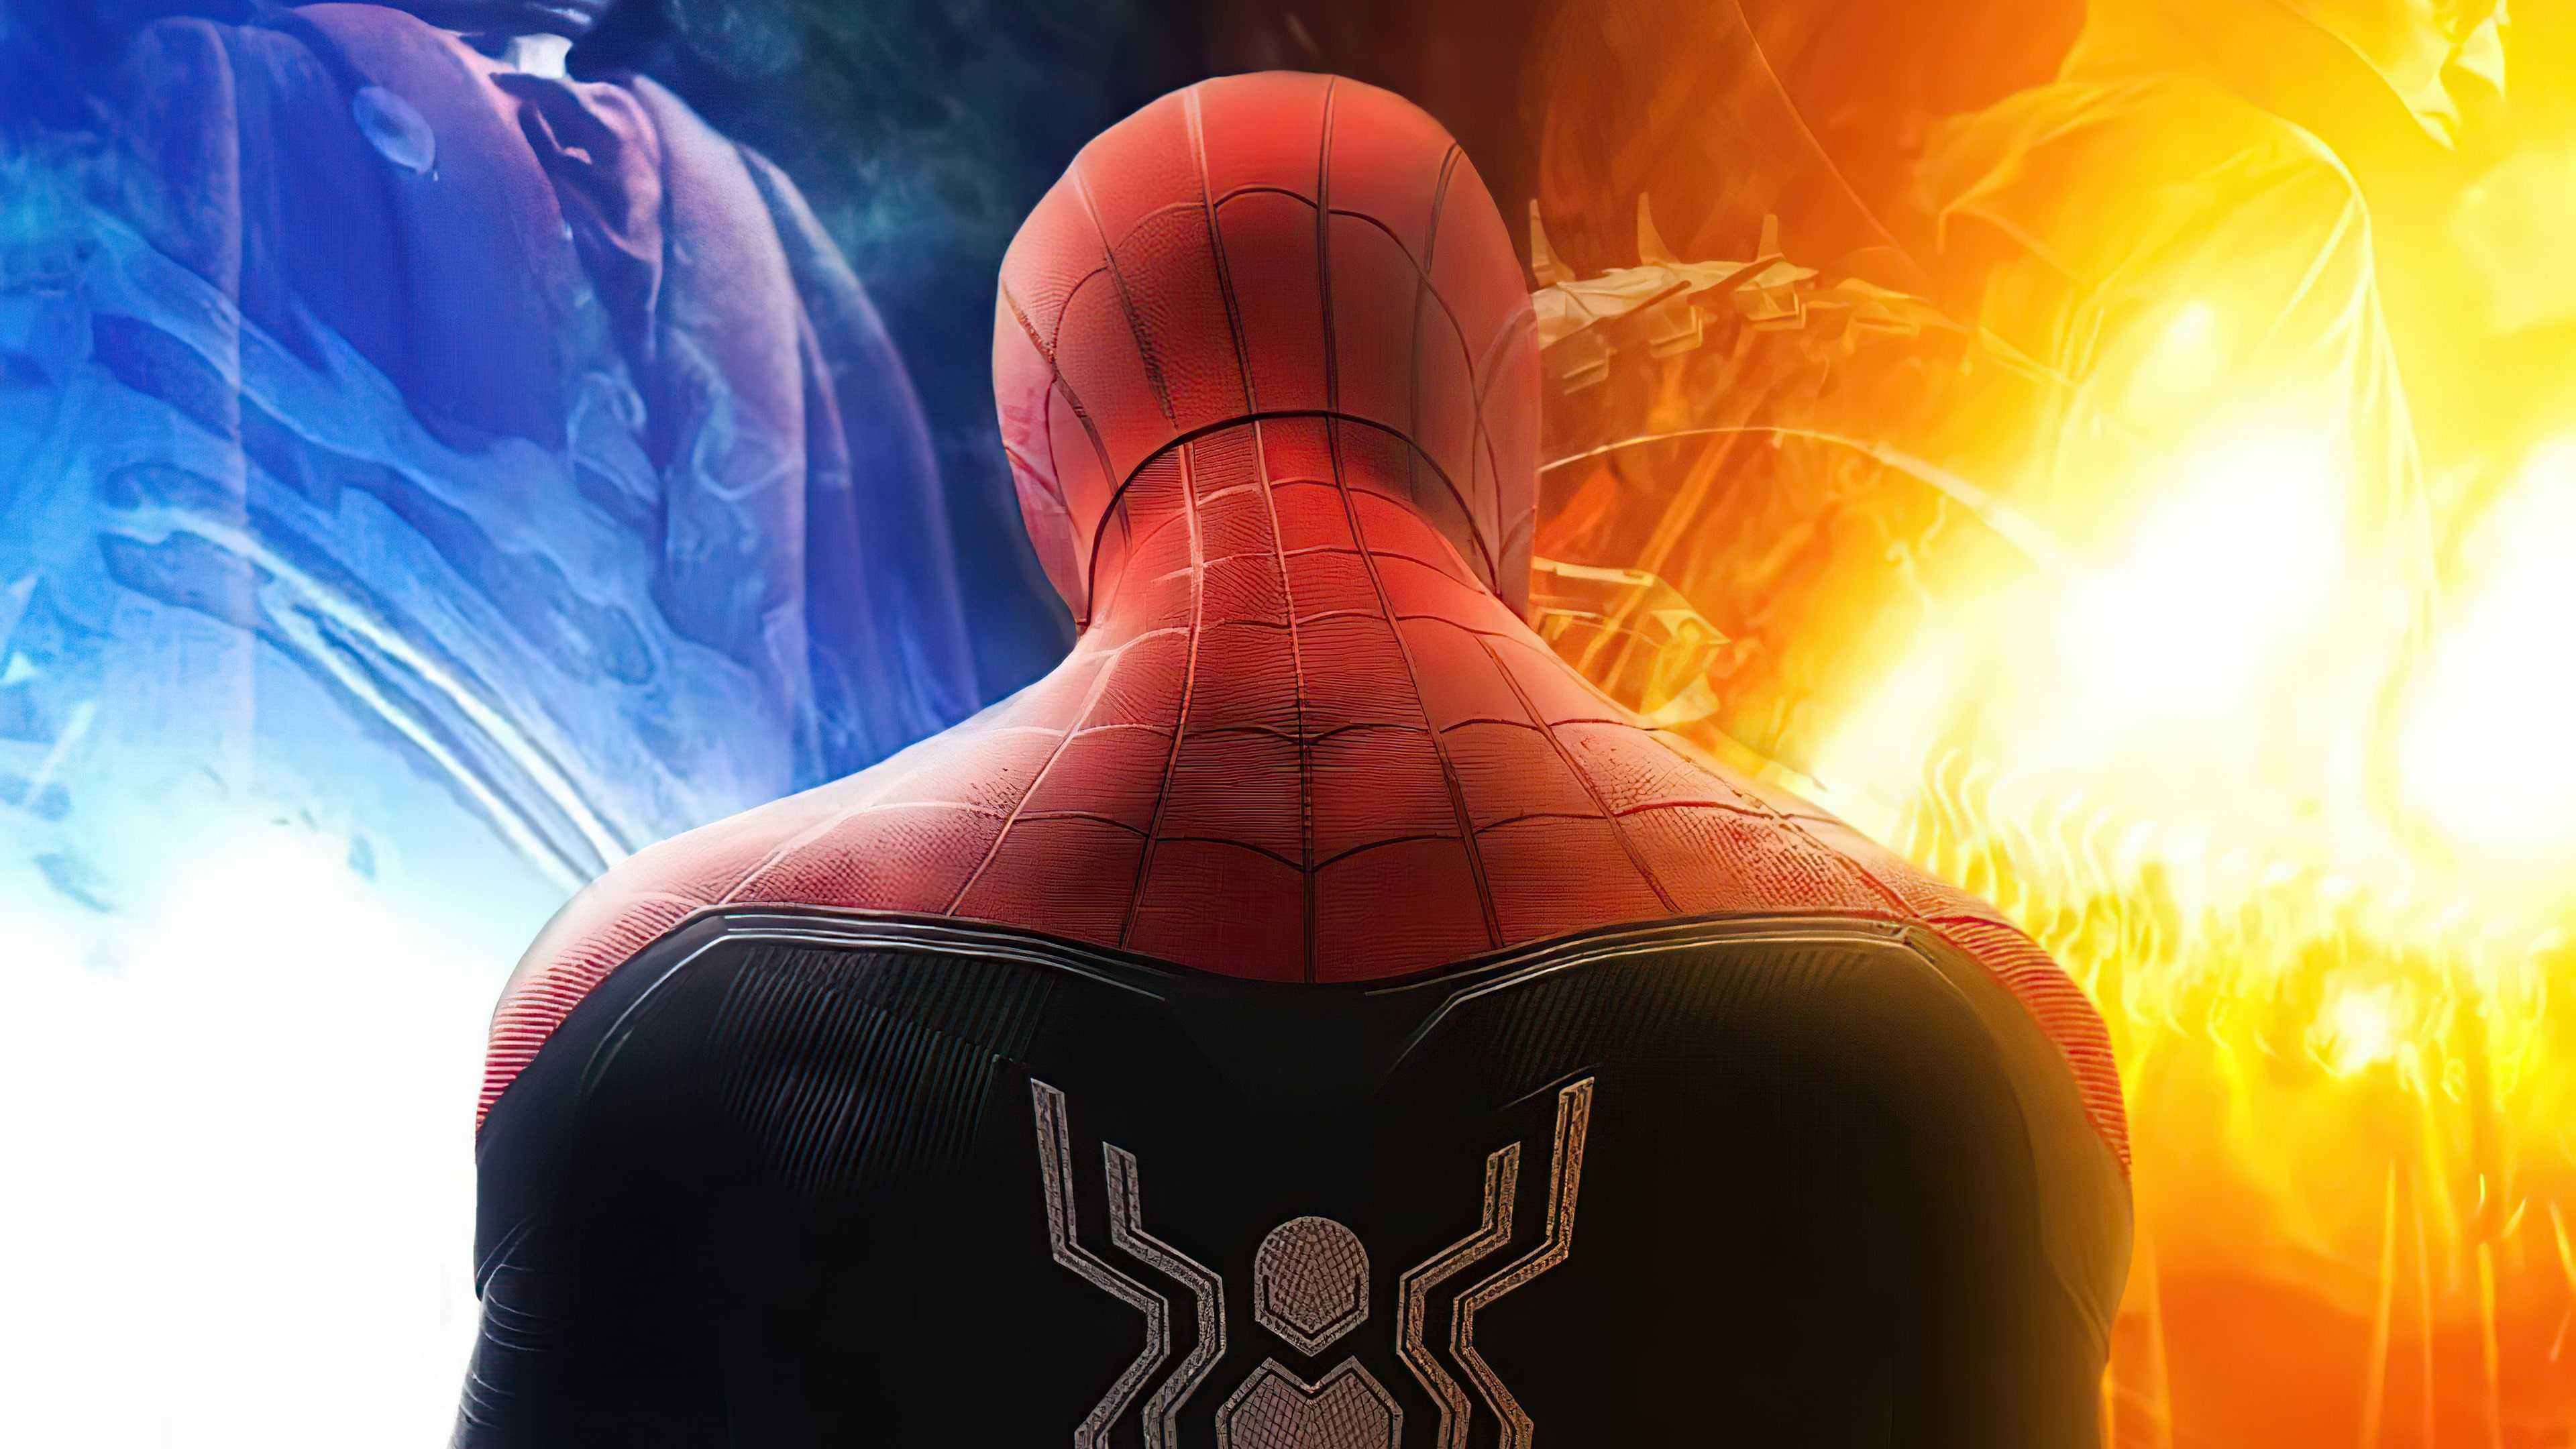 Doctor Octopus Hd No Way Home Spider-Man Wallpapers